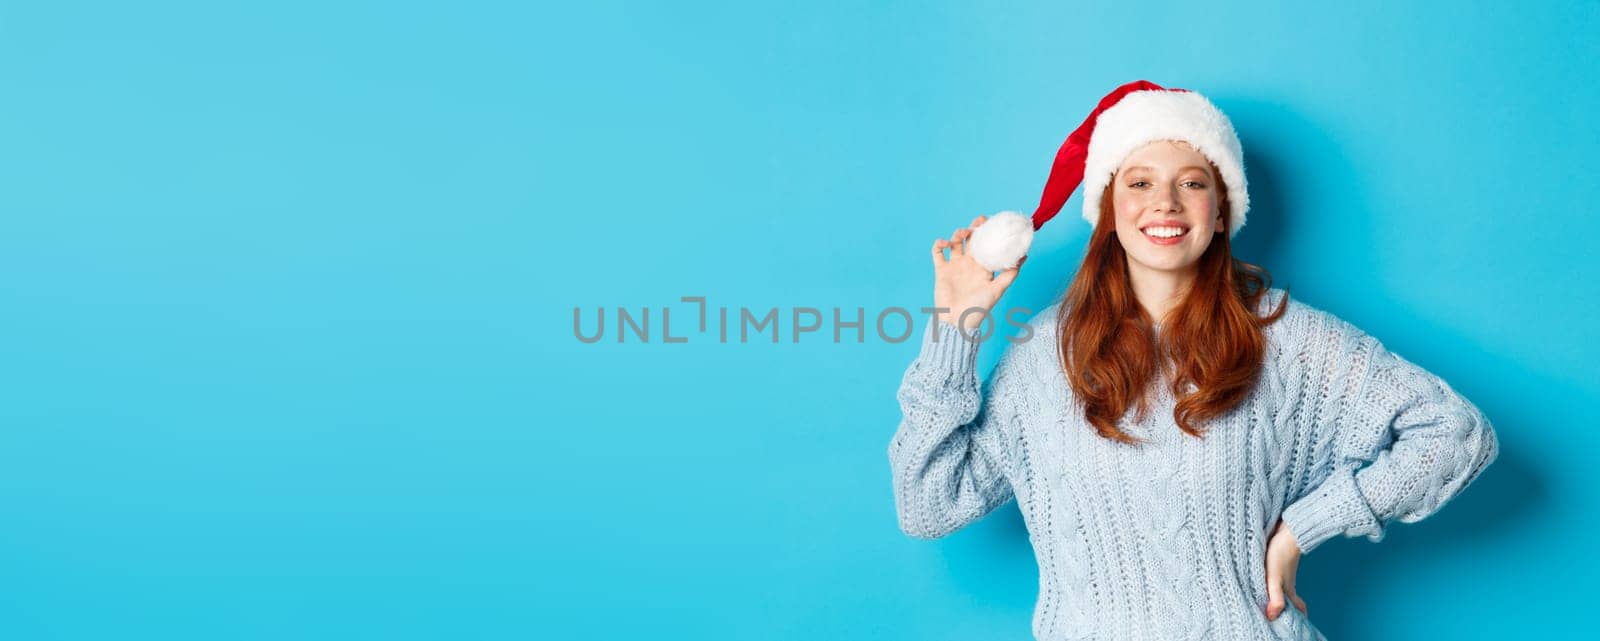 Winter holidays and Christmas Eve concept. Cheerful redhead teenage girl wearing Santa hat and smiling satisfied, standing in sweater against blue background.